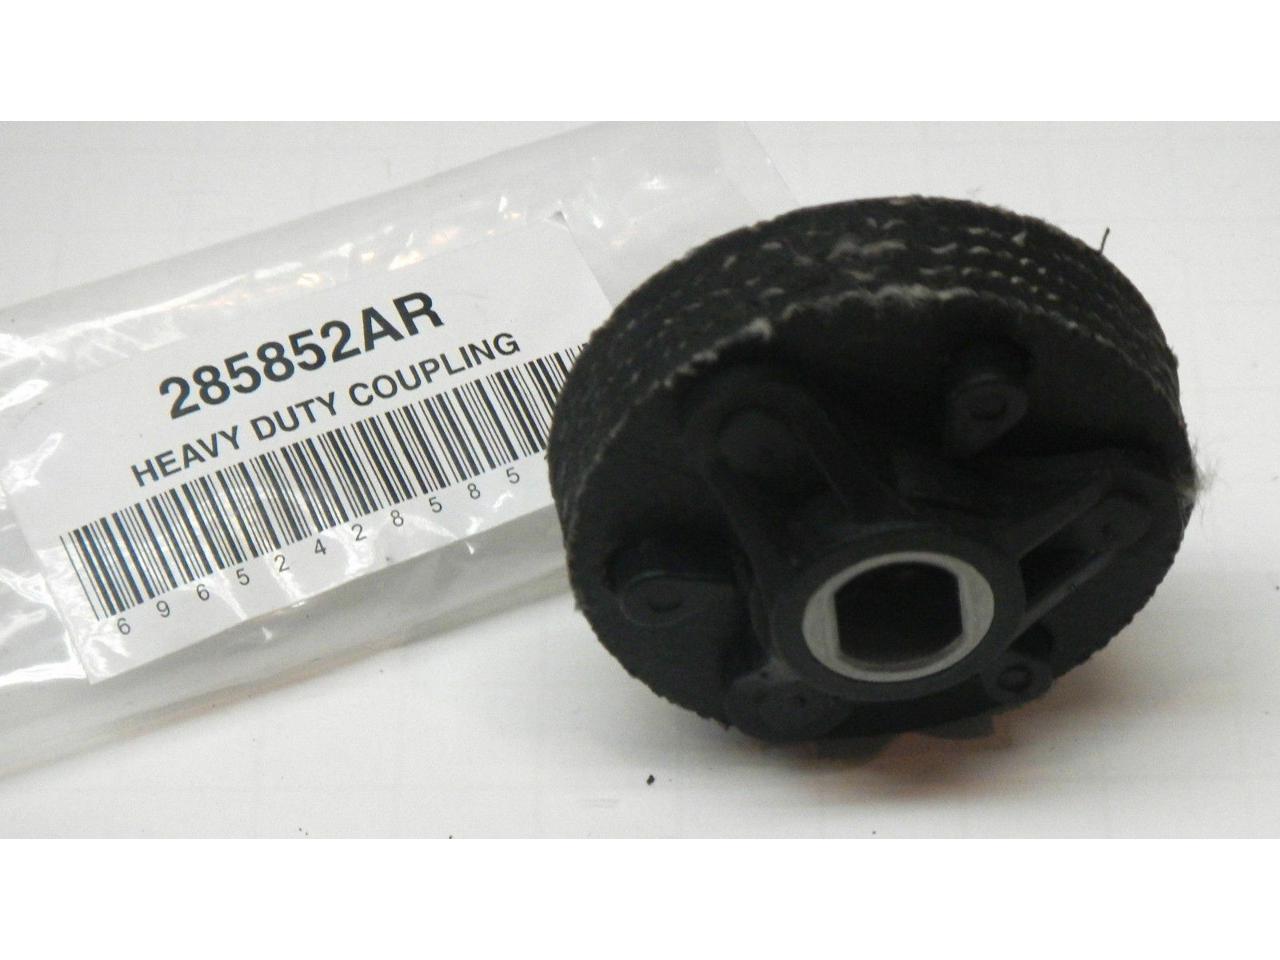 285852AR for Whirlpool Kenmore Heavy Duty Washer Coupling